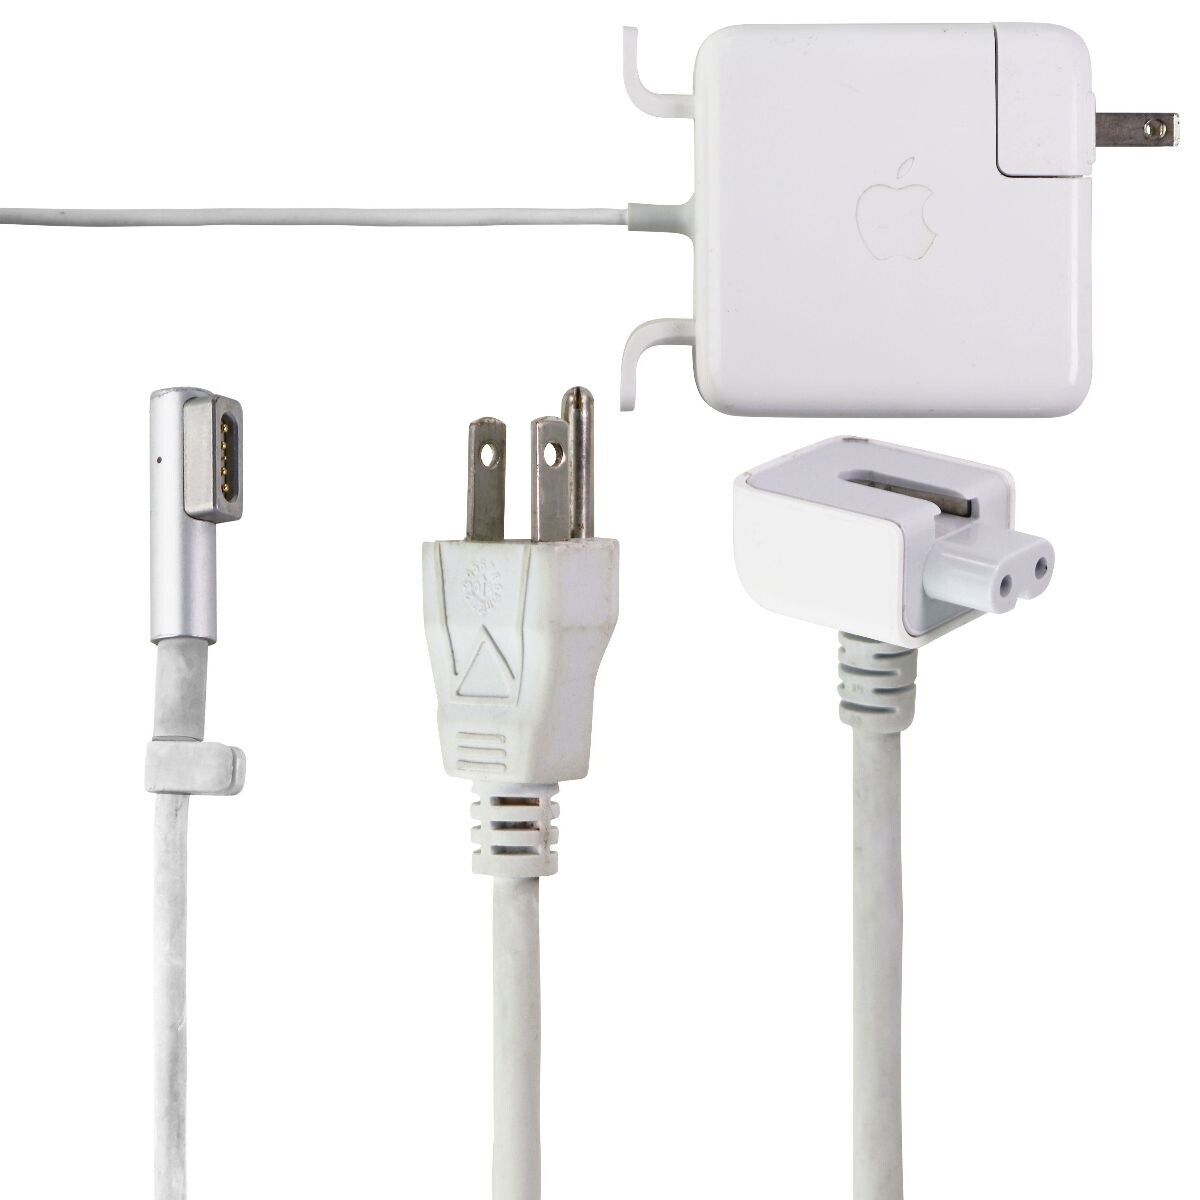 FAIR Apple 60W MagSafe Power Adapter w/ Wall Plug & Cable (A1330, Old Gen L)